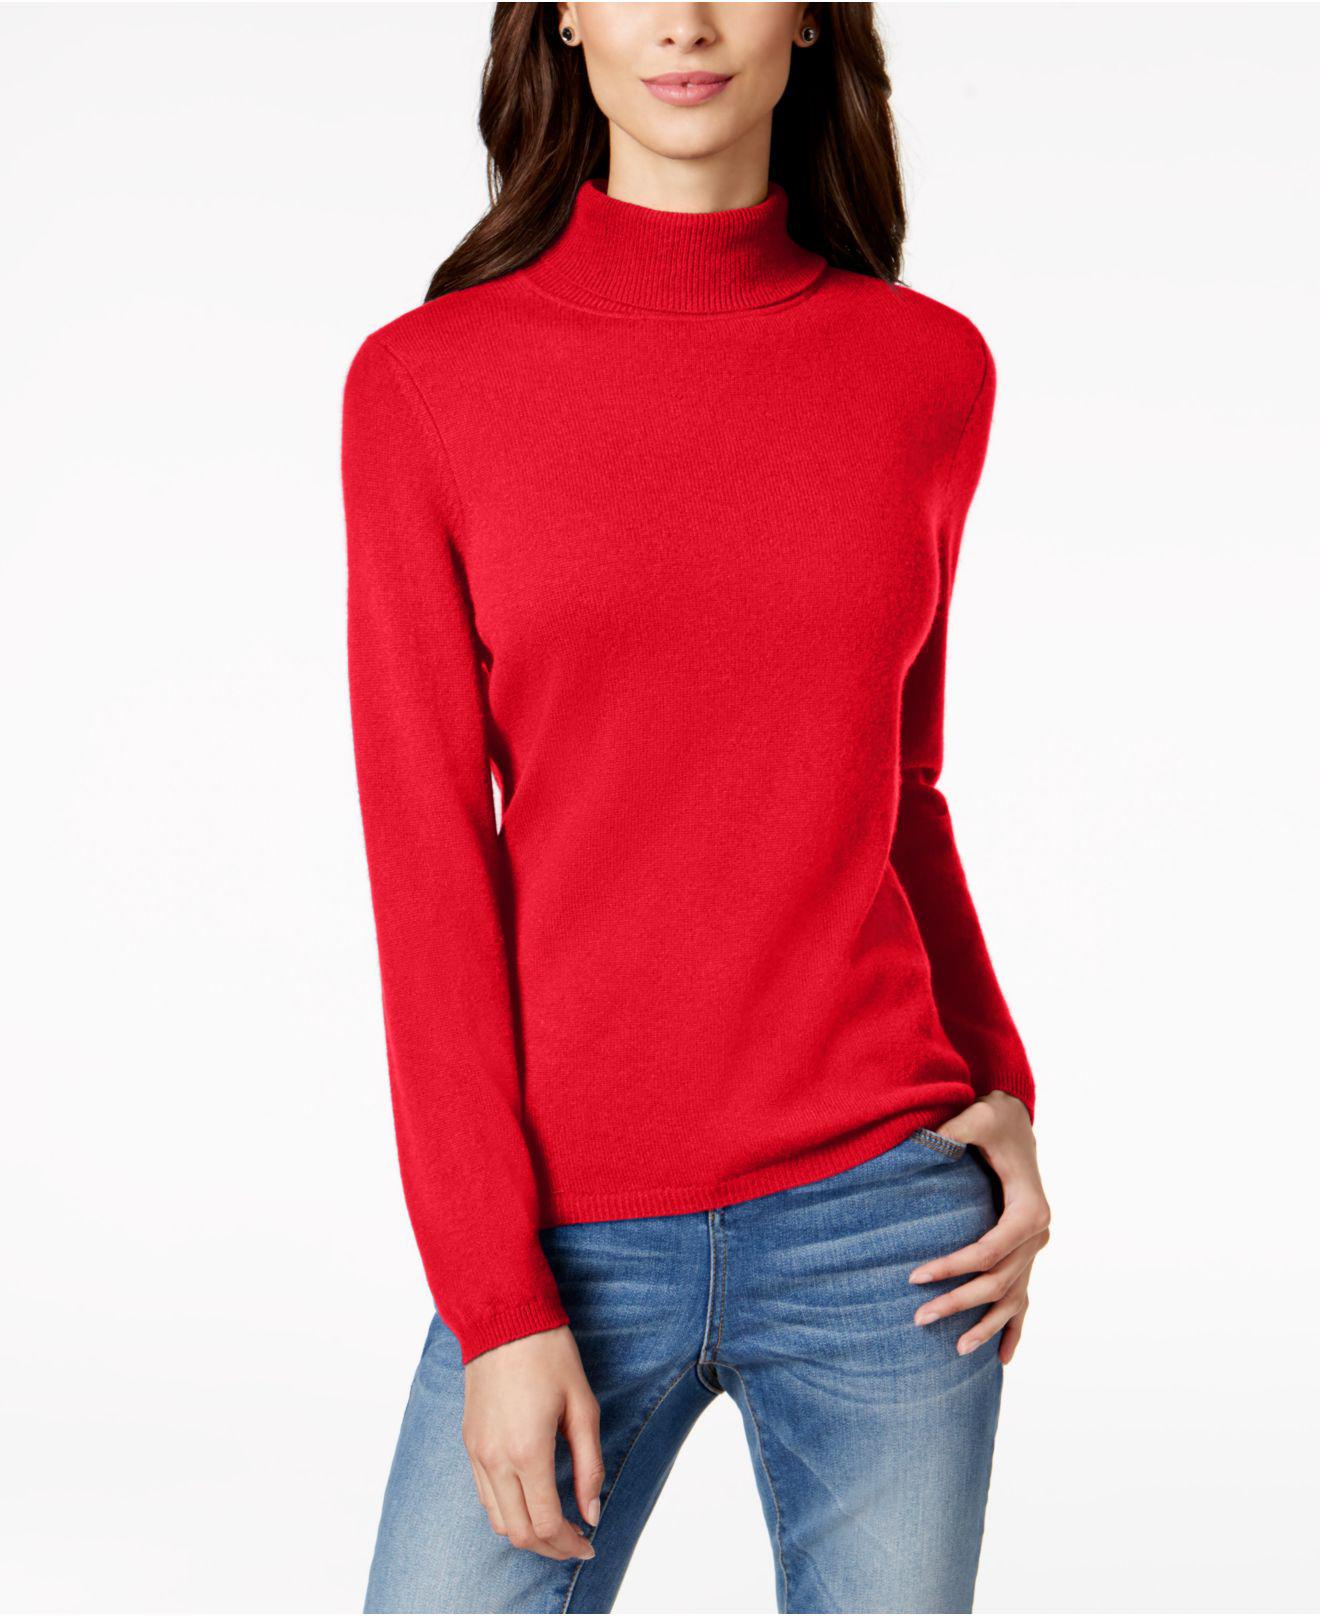 Charter Club Cashmere Turtleneck Sweater in Red - Lyst